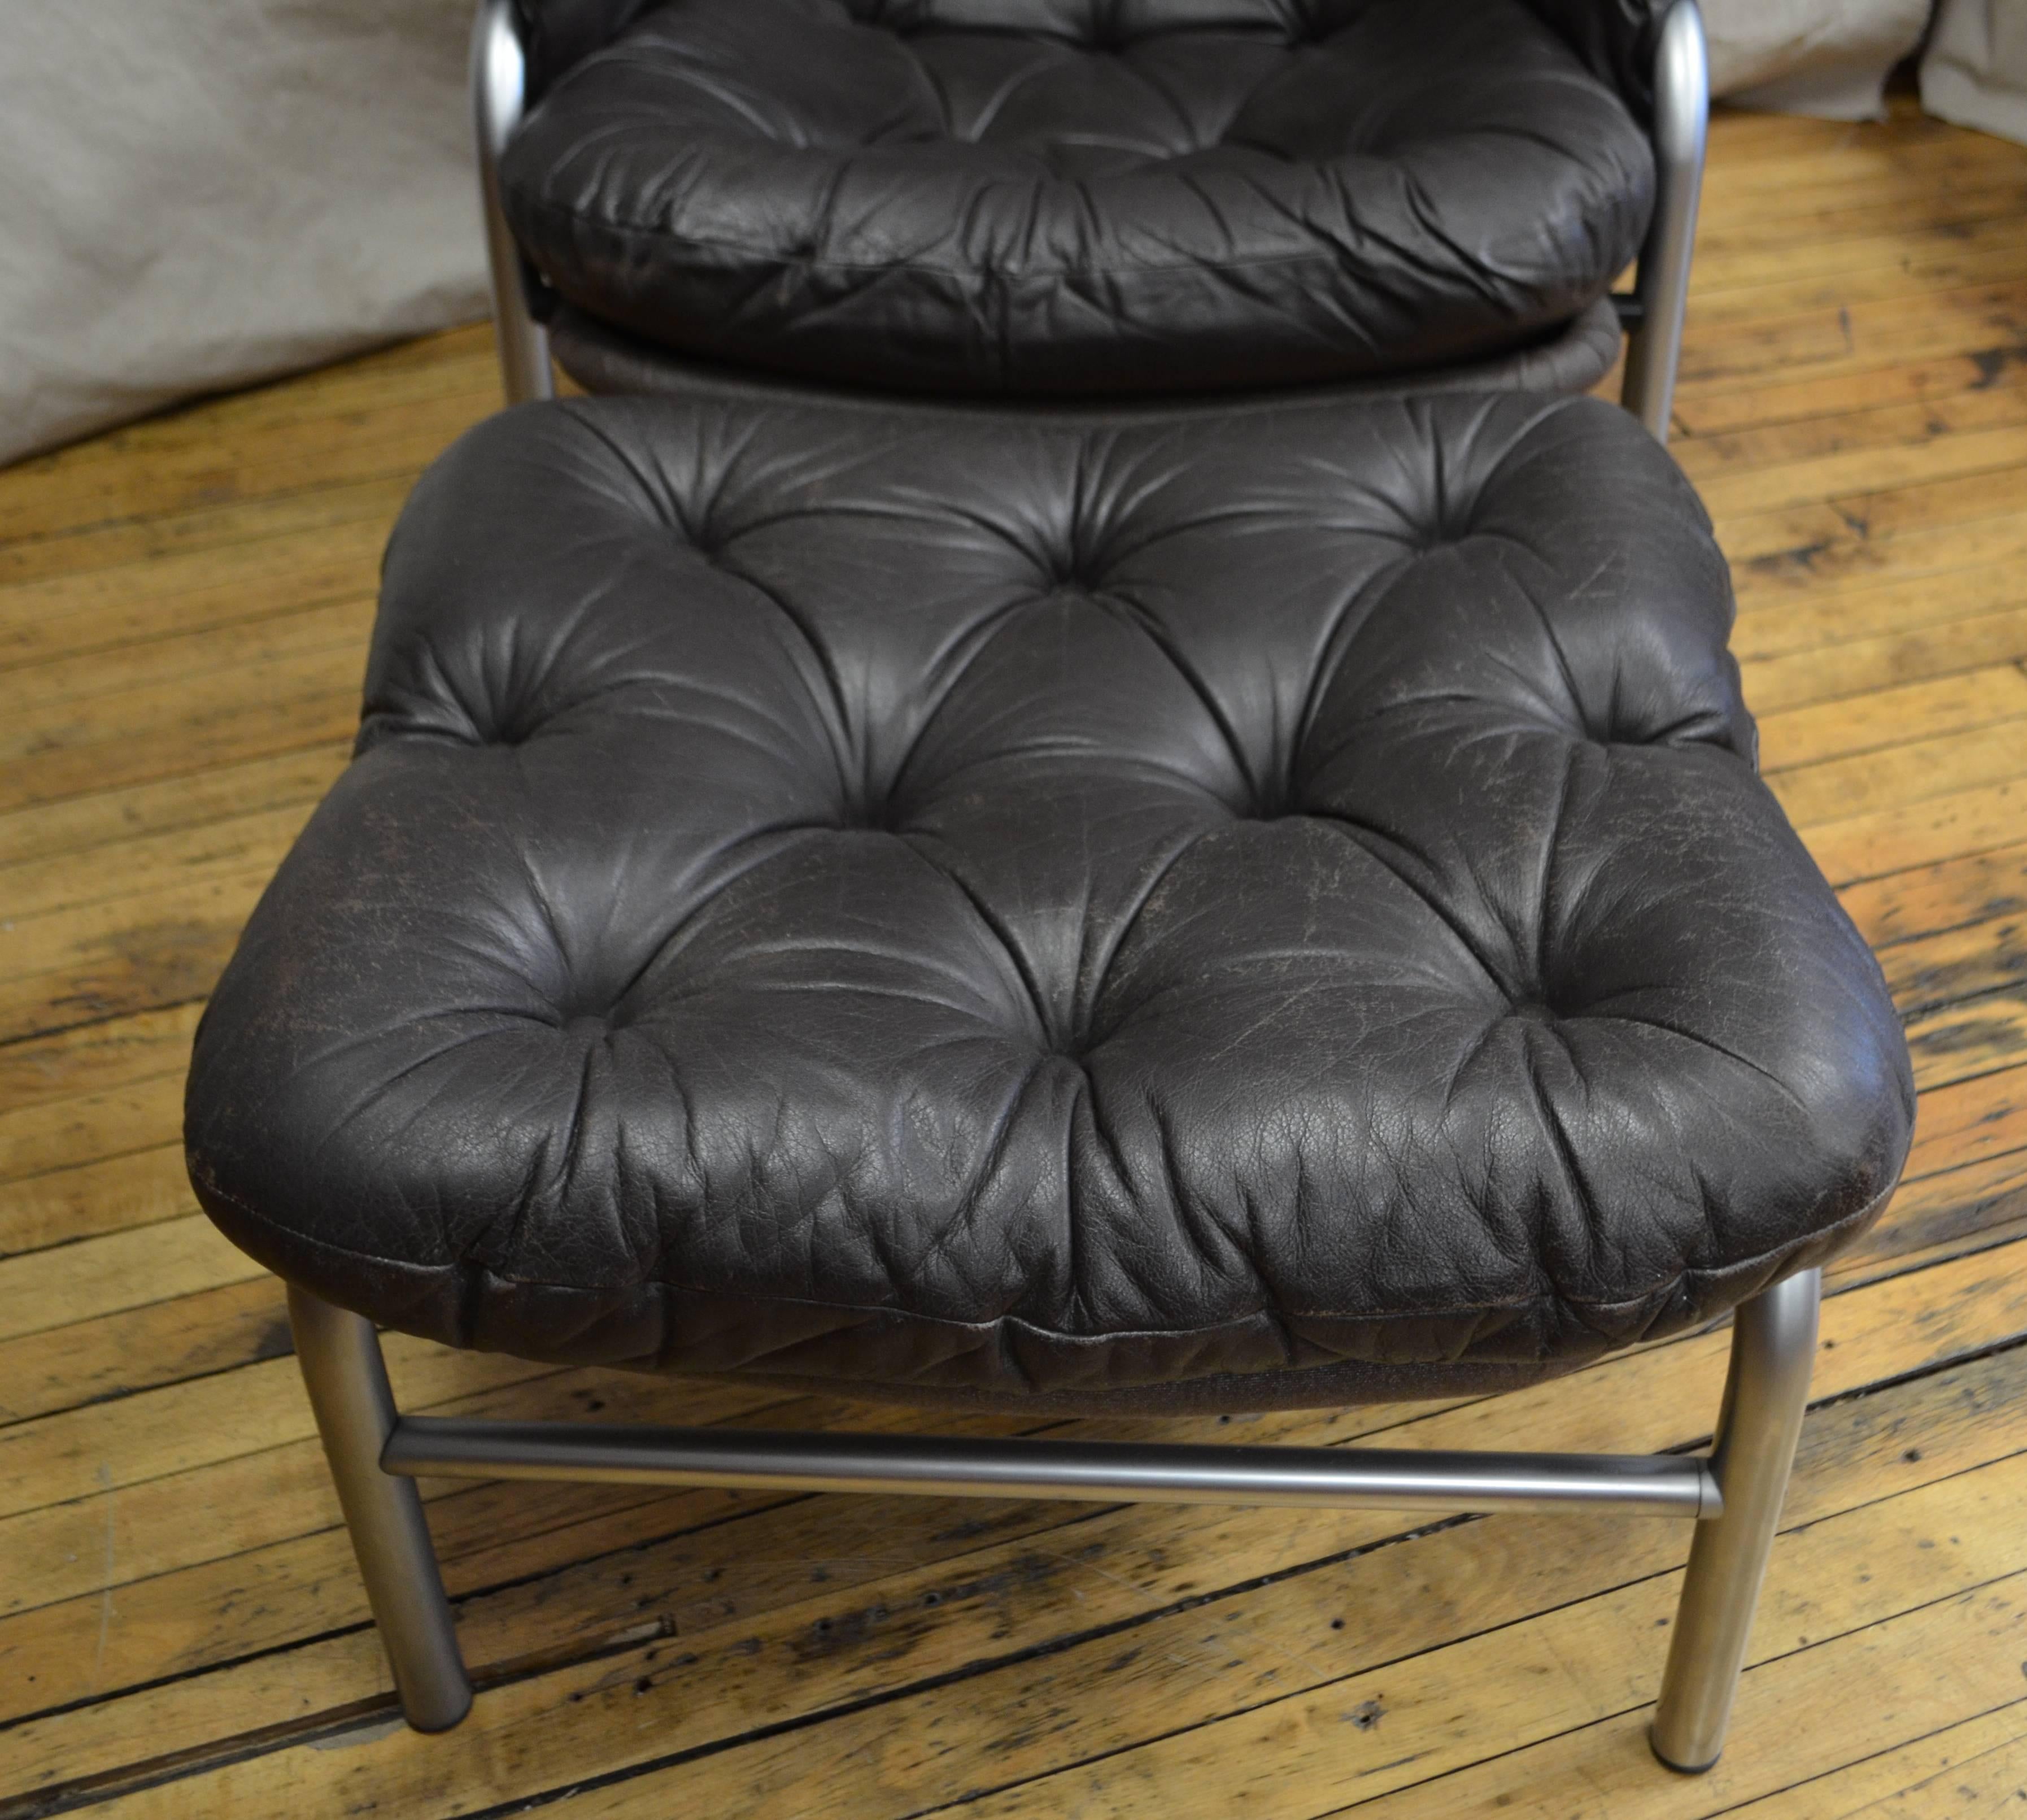 Lounge chair and ottoman from France & Son, designed by Arne Vodder. Made in Denmark and dating back to the early 1960s, prior to the buyout by Cado in the mid-1960s. Chair sits beautifully with leather hand worn velvet smooth to perfection.